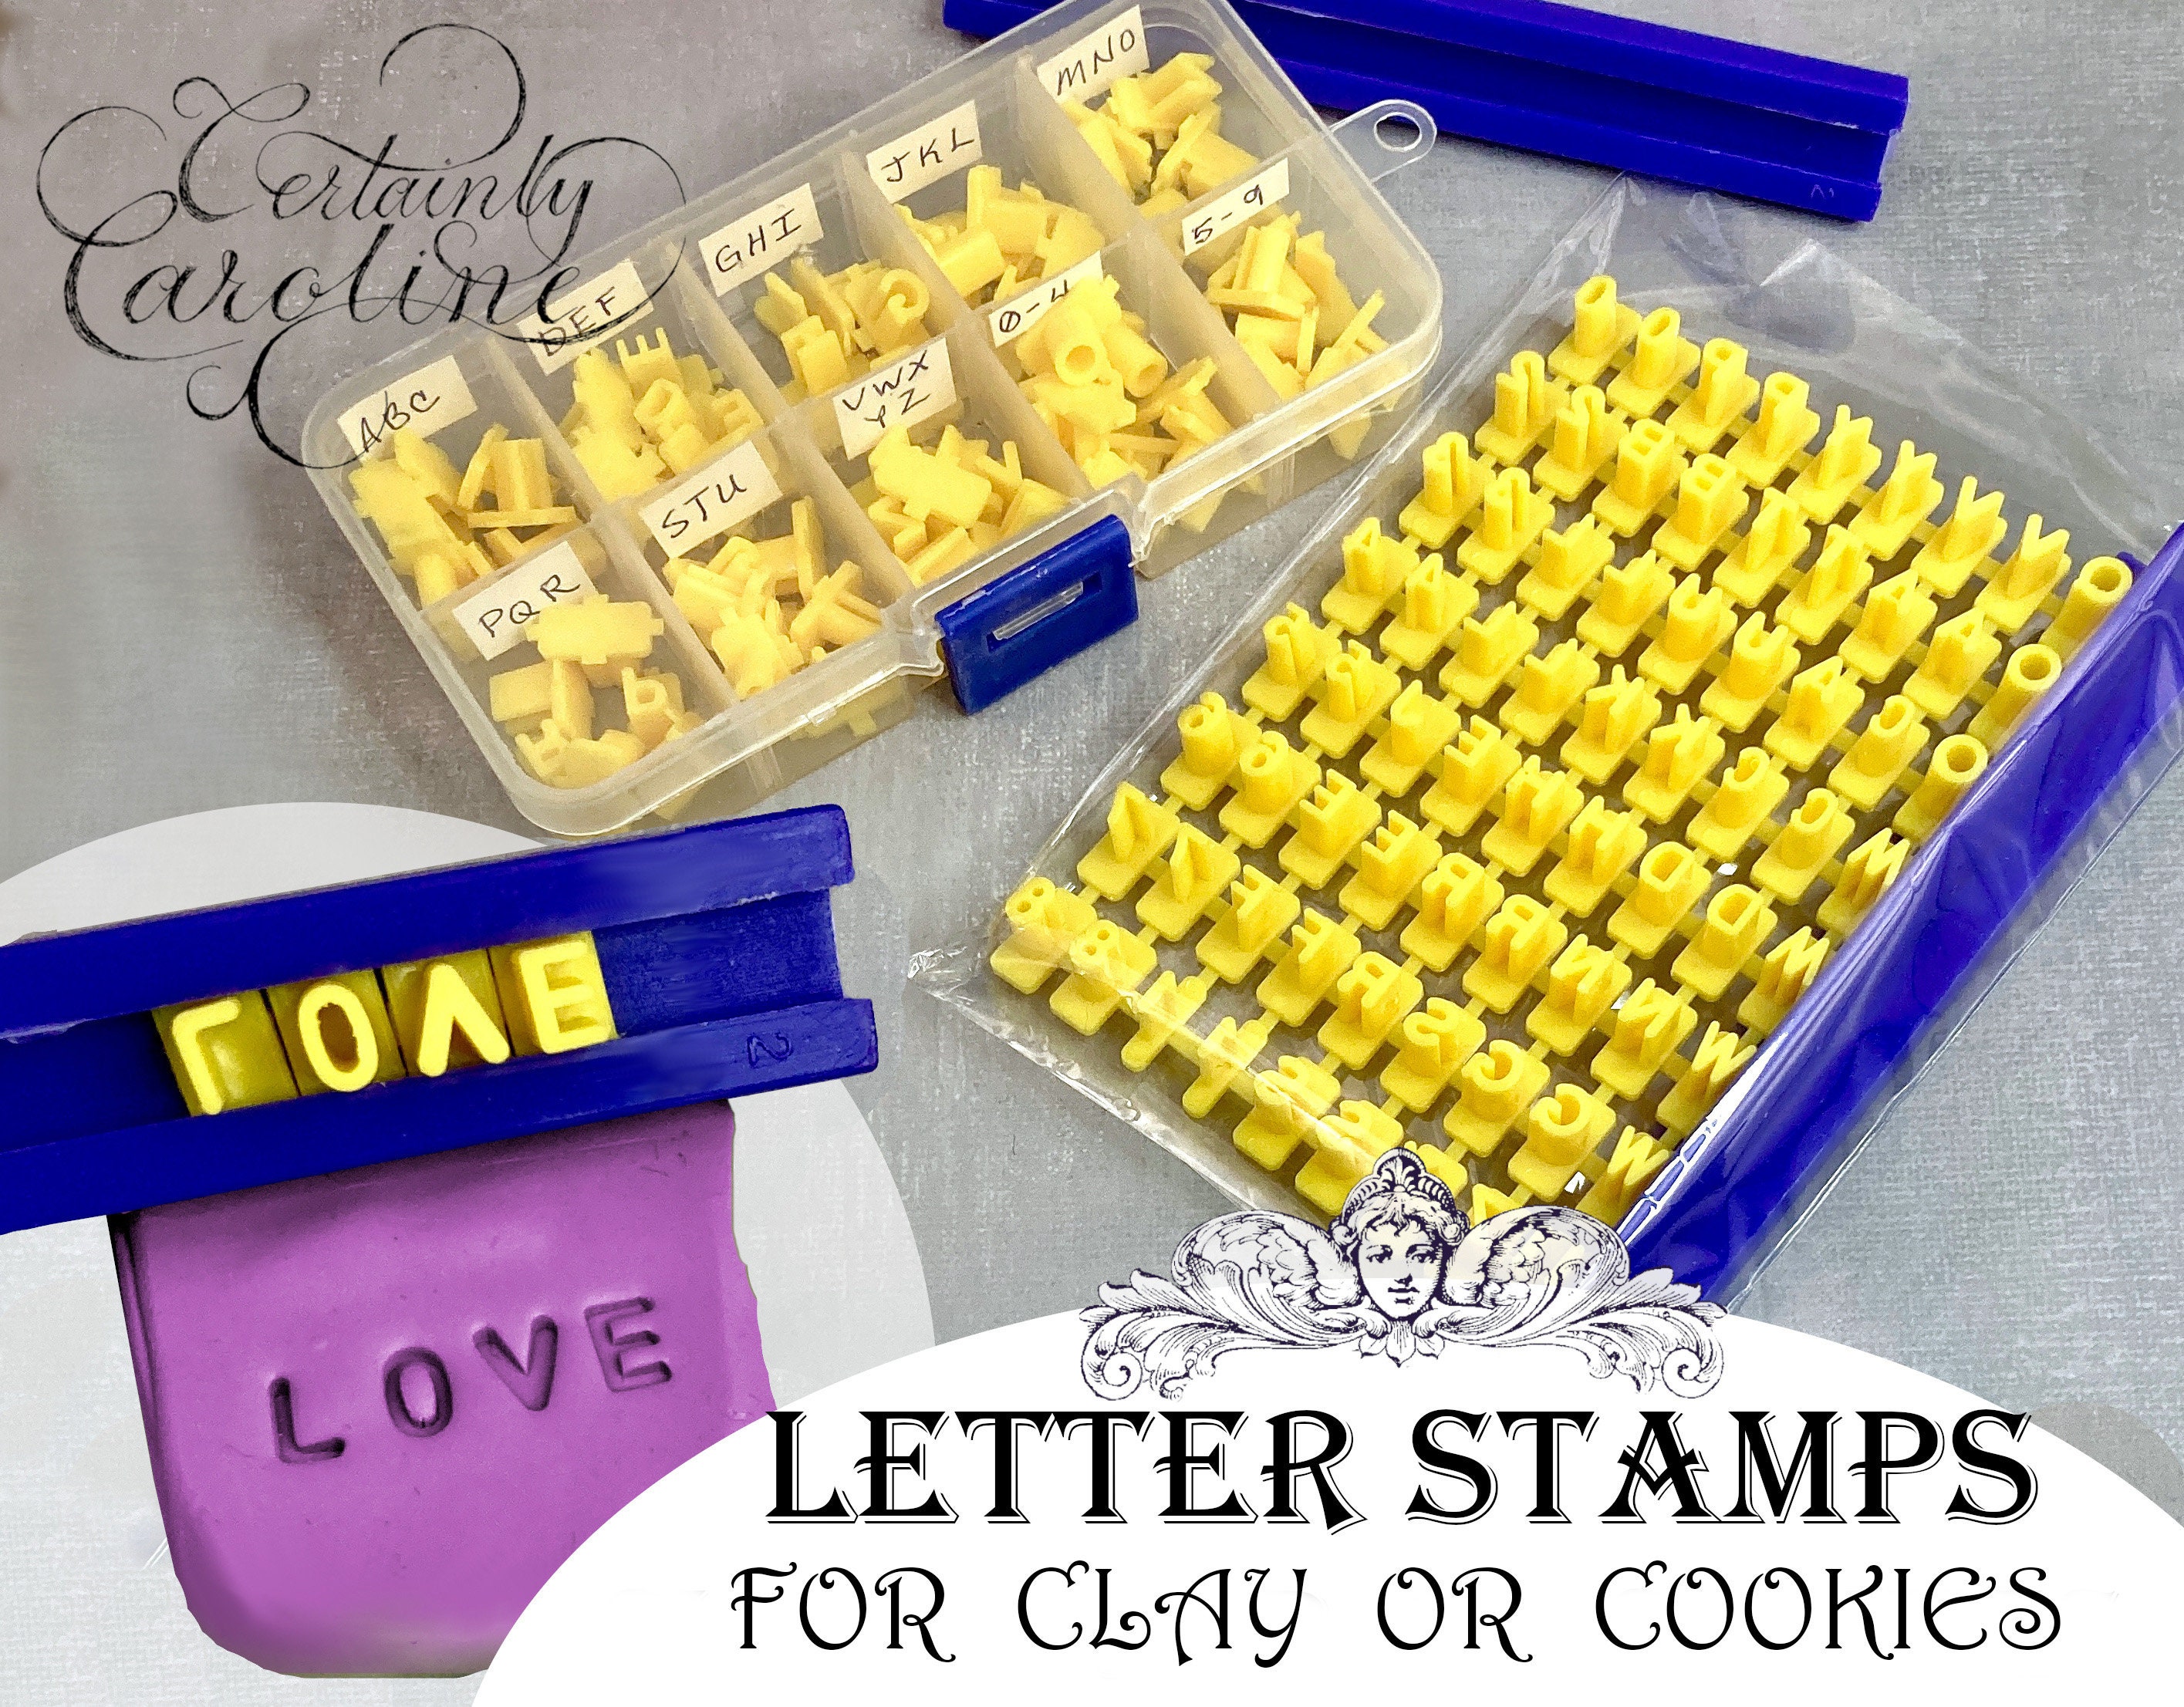 Oumefar Letter Stamps for Clay, Retro Wooden Mini Letter Stamp Woodenink  Letter and Number Stamps Set Art Handicraft Card Making Rubberstamp Clay